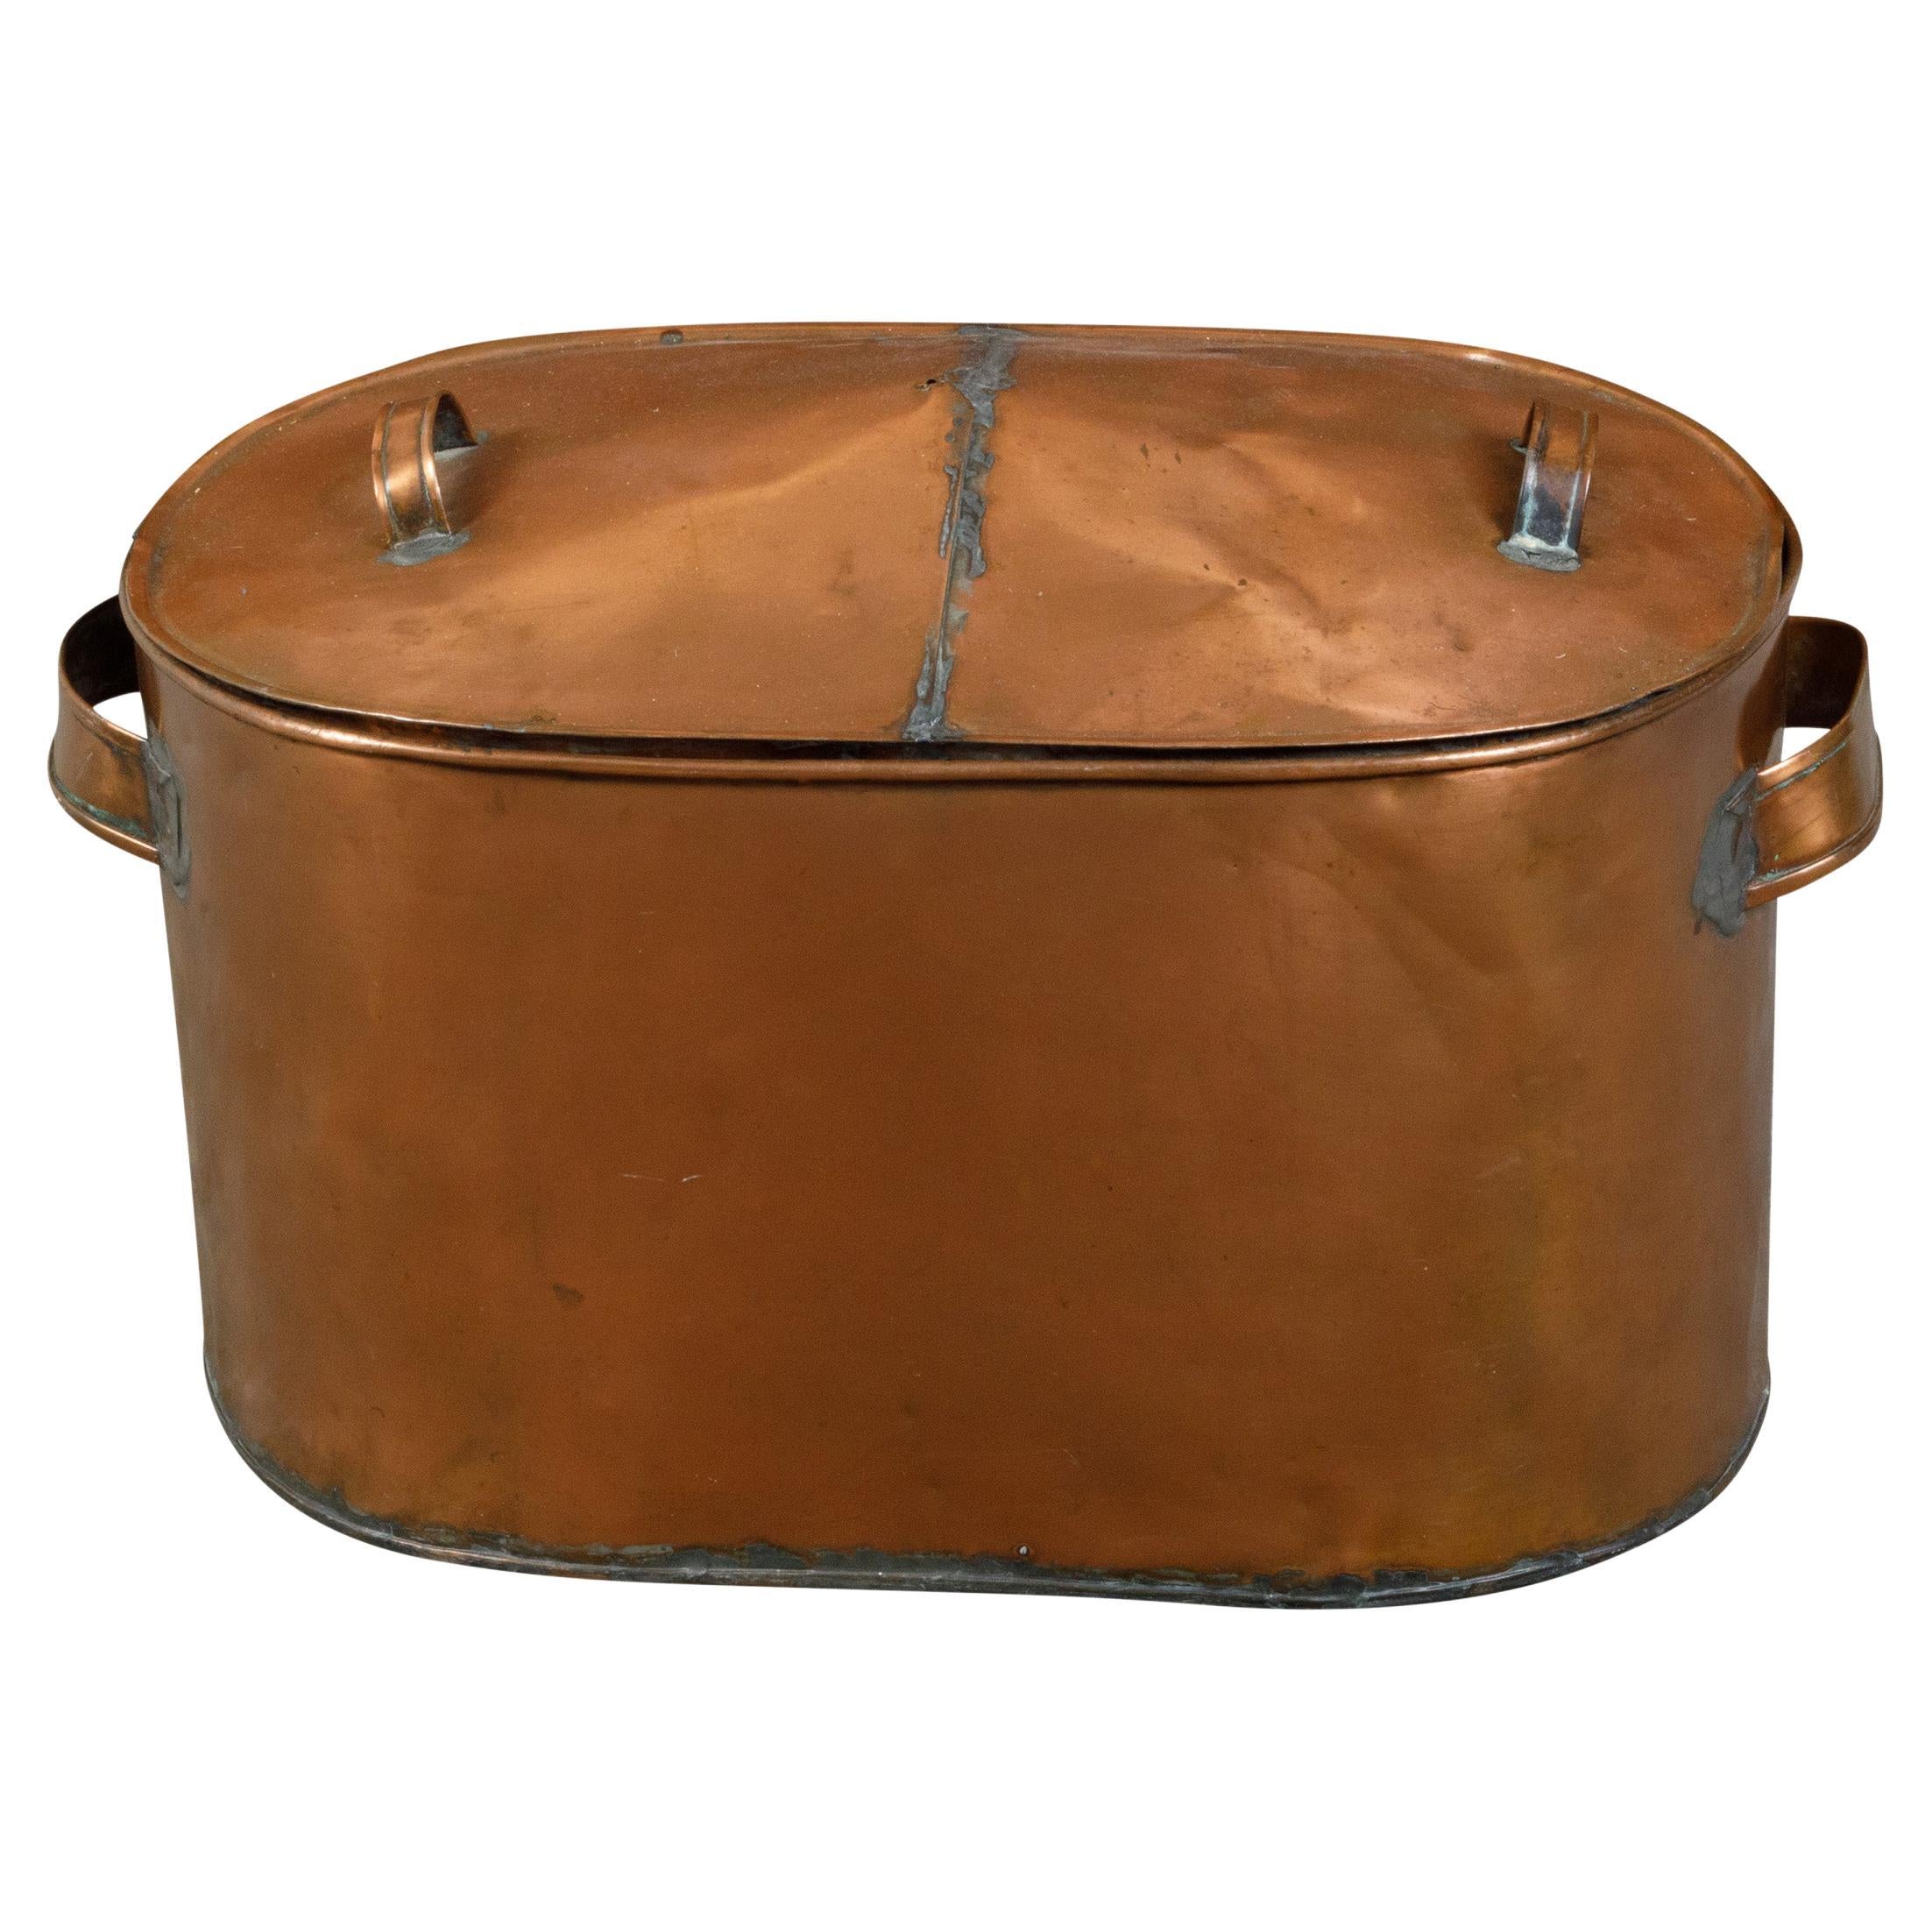 Revere Ware, Aged Copper Bottom, 1 Quart Sauce Pan, Chrome Cooking